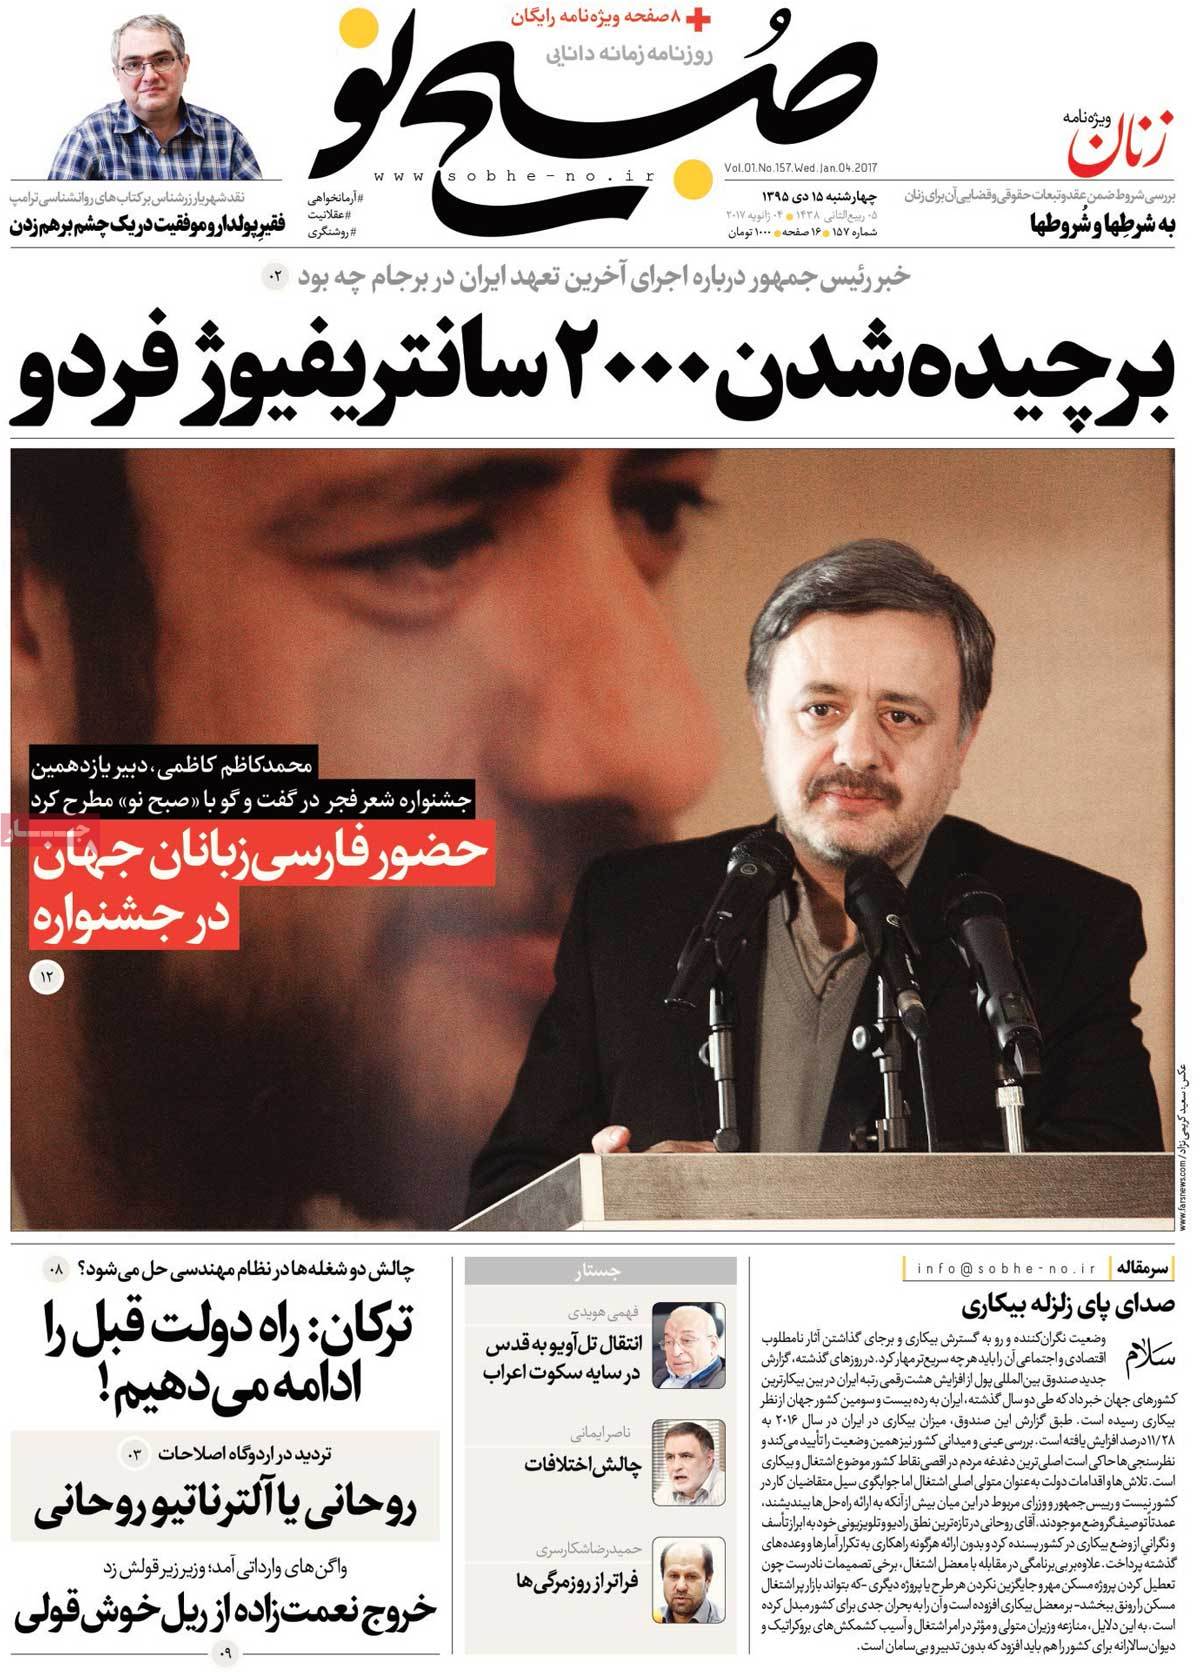 A Look at Iranian Newspaper Front Pages on January 4